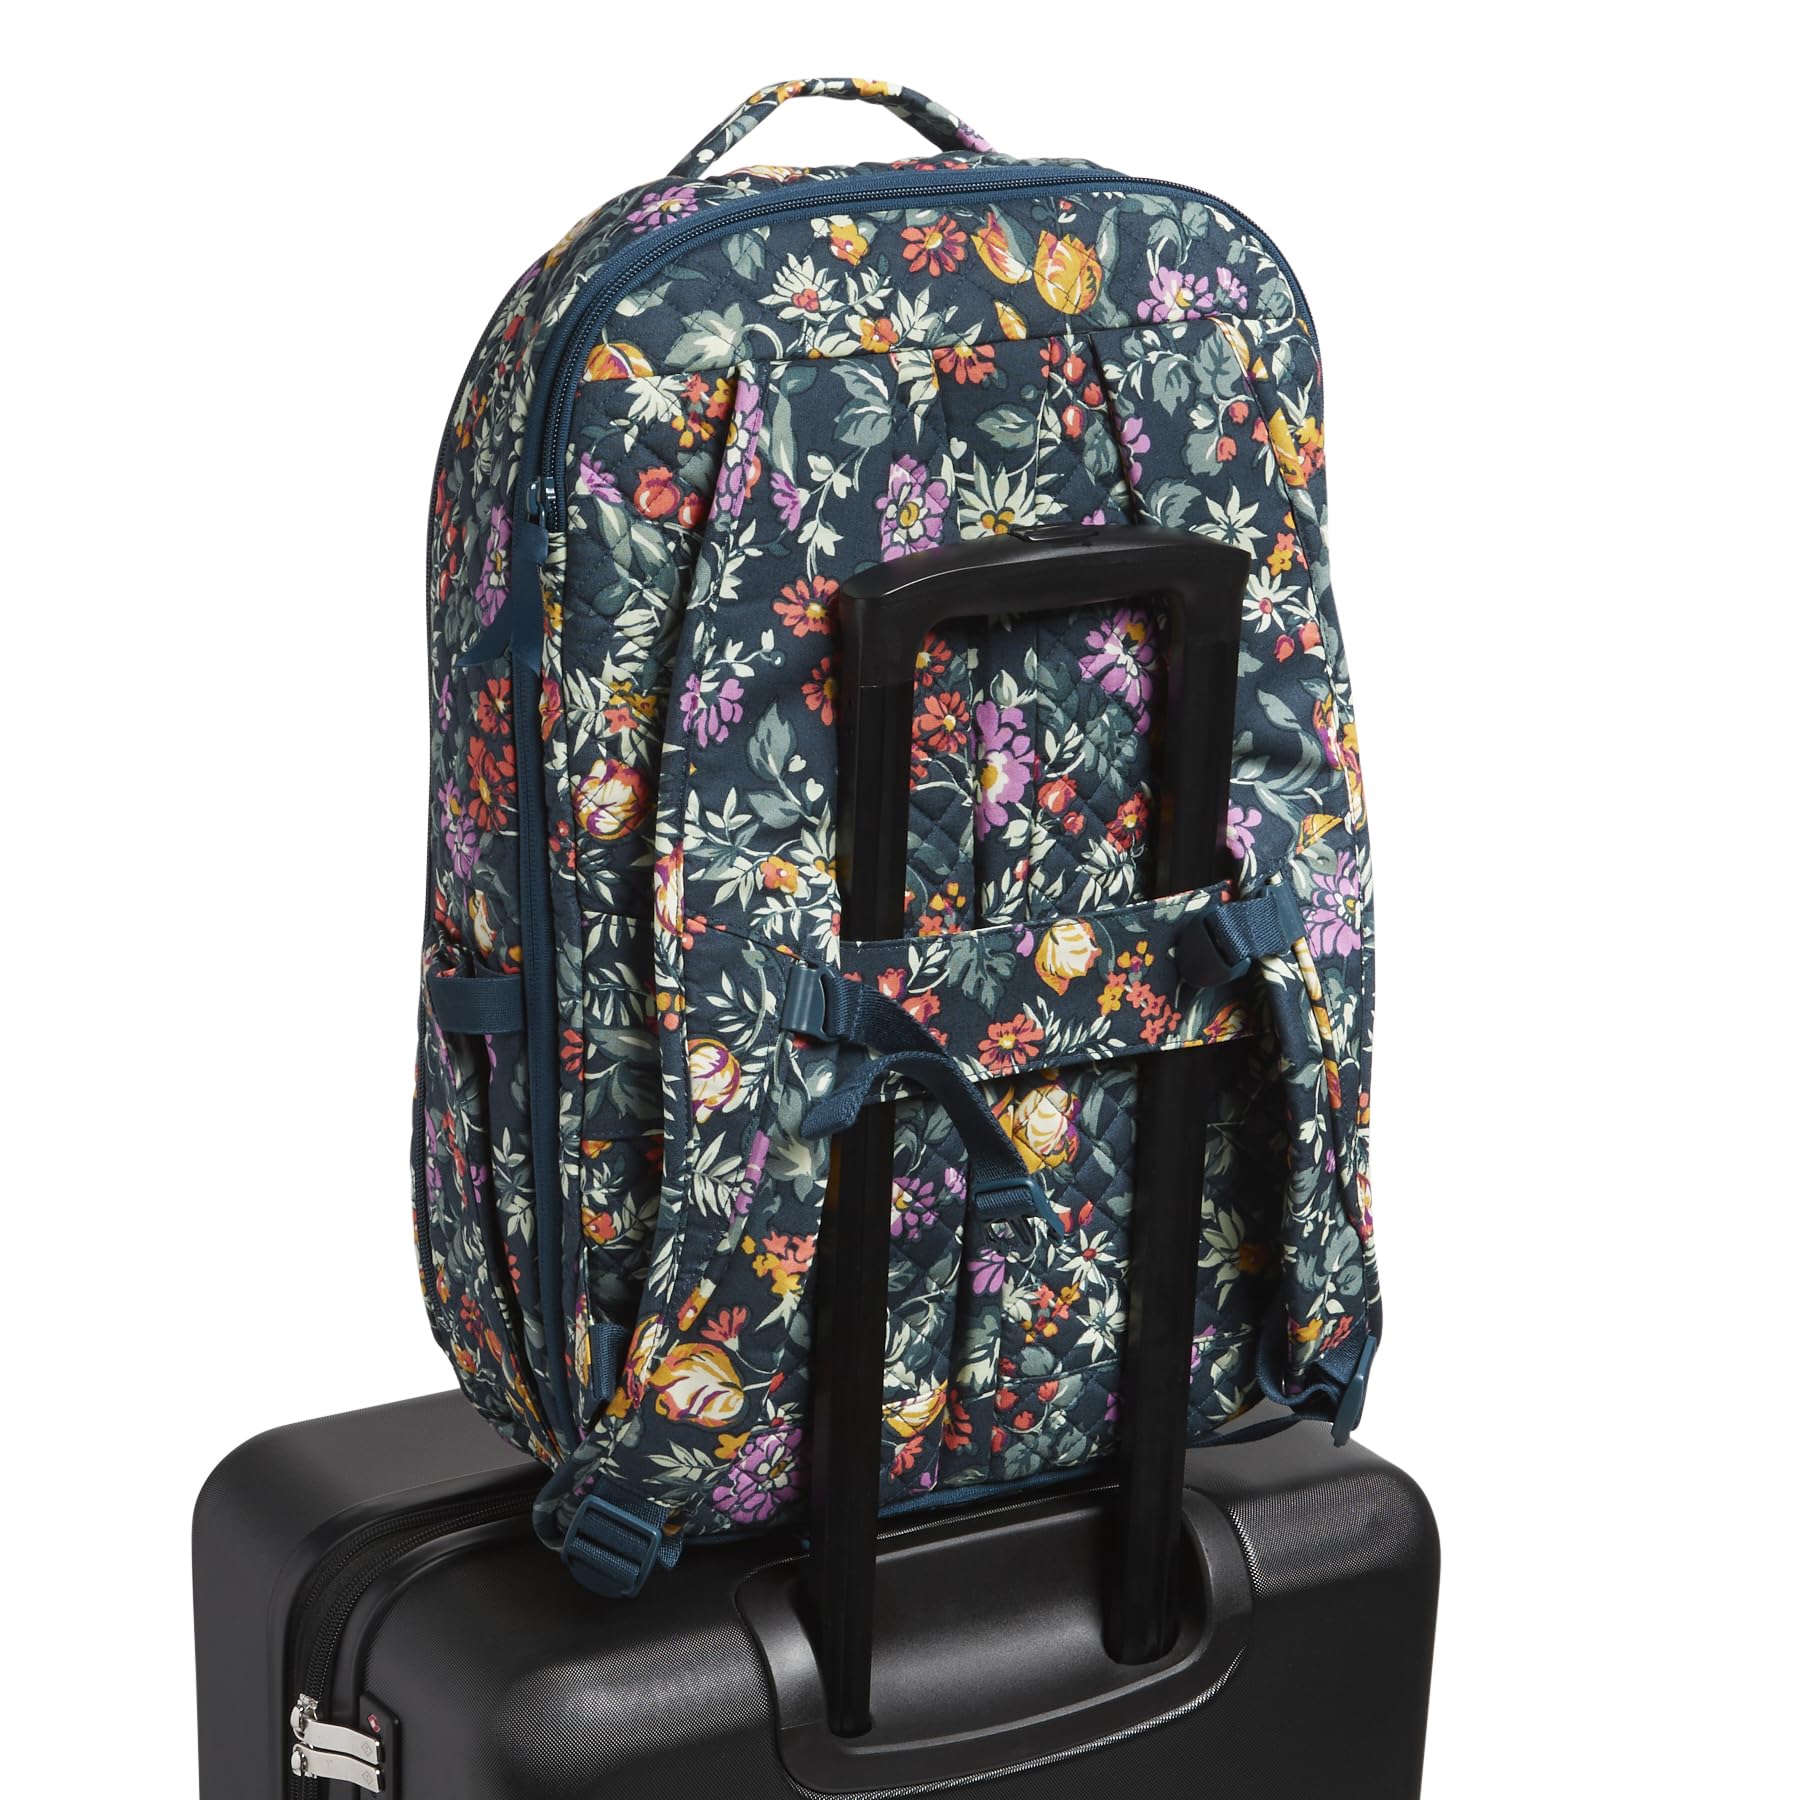 Vera Bradley Women's, Cotton Large Travel Backpack Travel Bag, Fresh-cut Floral Green, One Size